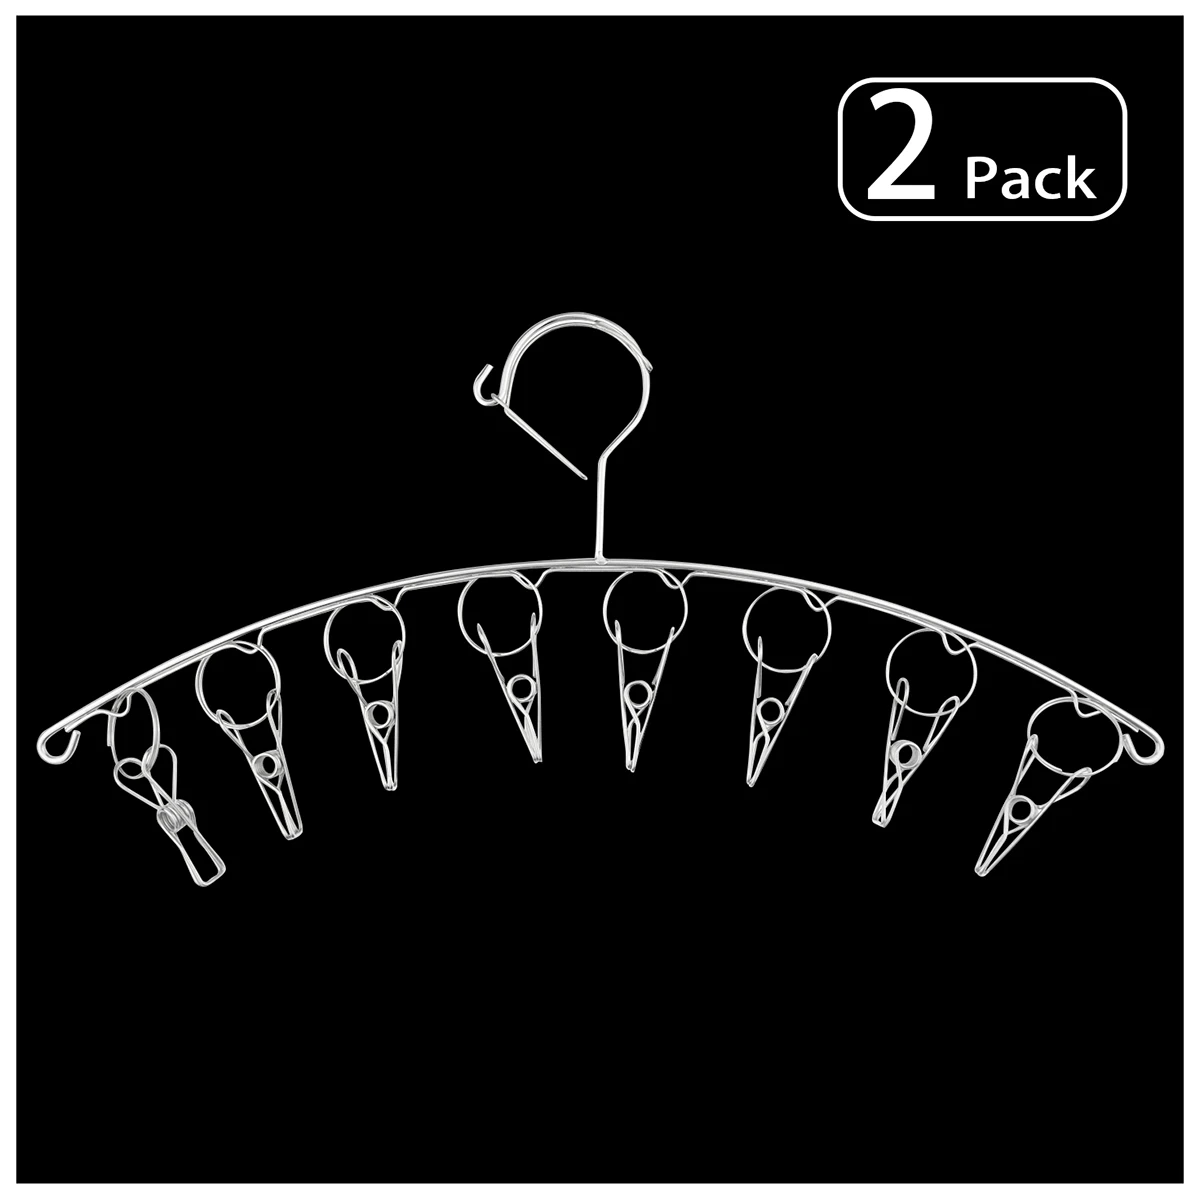 

2pcs Clothers Drying Rack Stainless Steel Clothes Hanger Laundry Clothing Racks With 8 Clips Closet Organizer Dropshipping JZ004